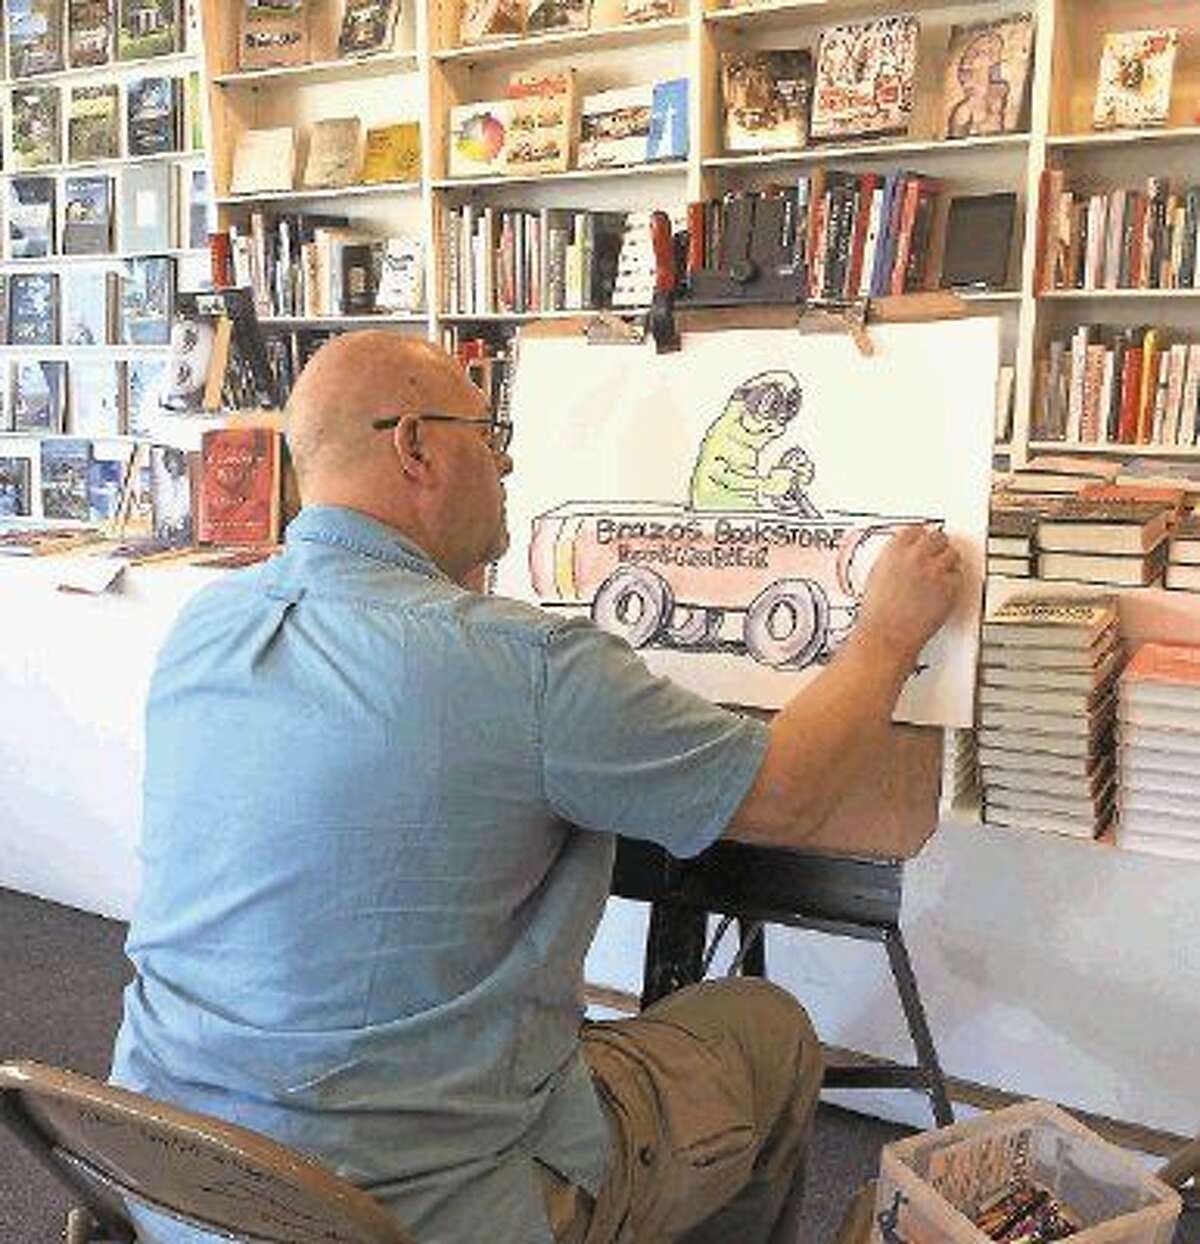 On March 26, Bill Megenhardt drew artwork for children at the Brazos Bookstore story time.